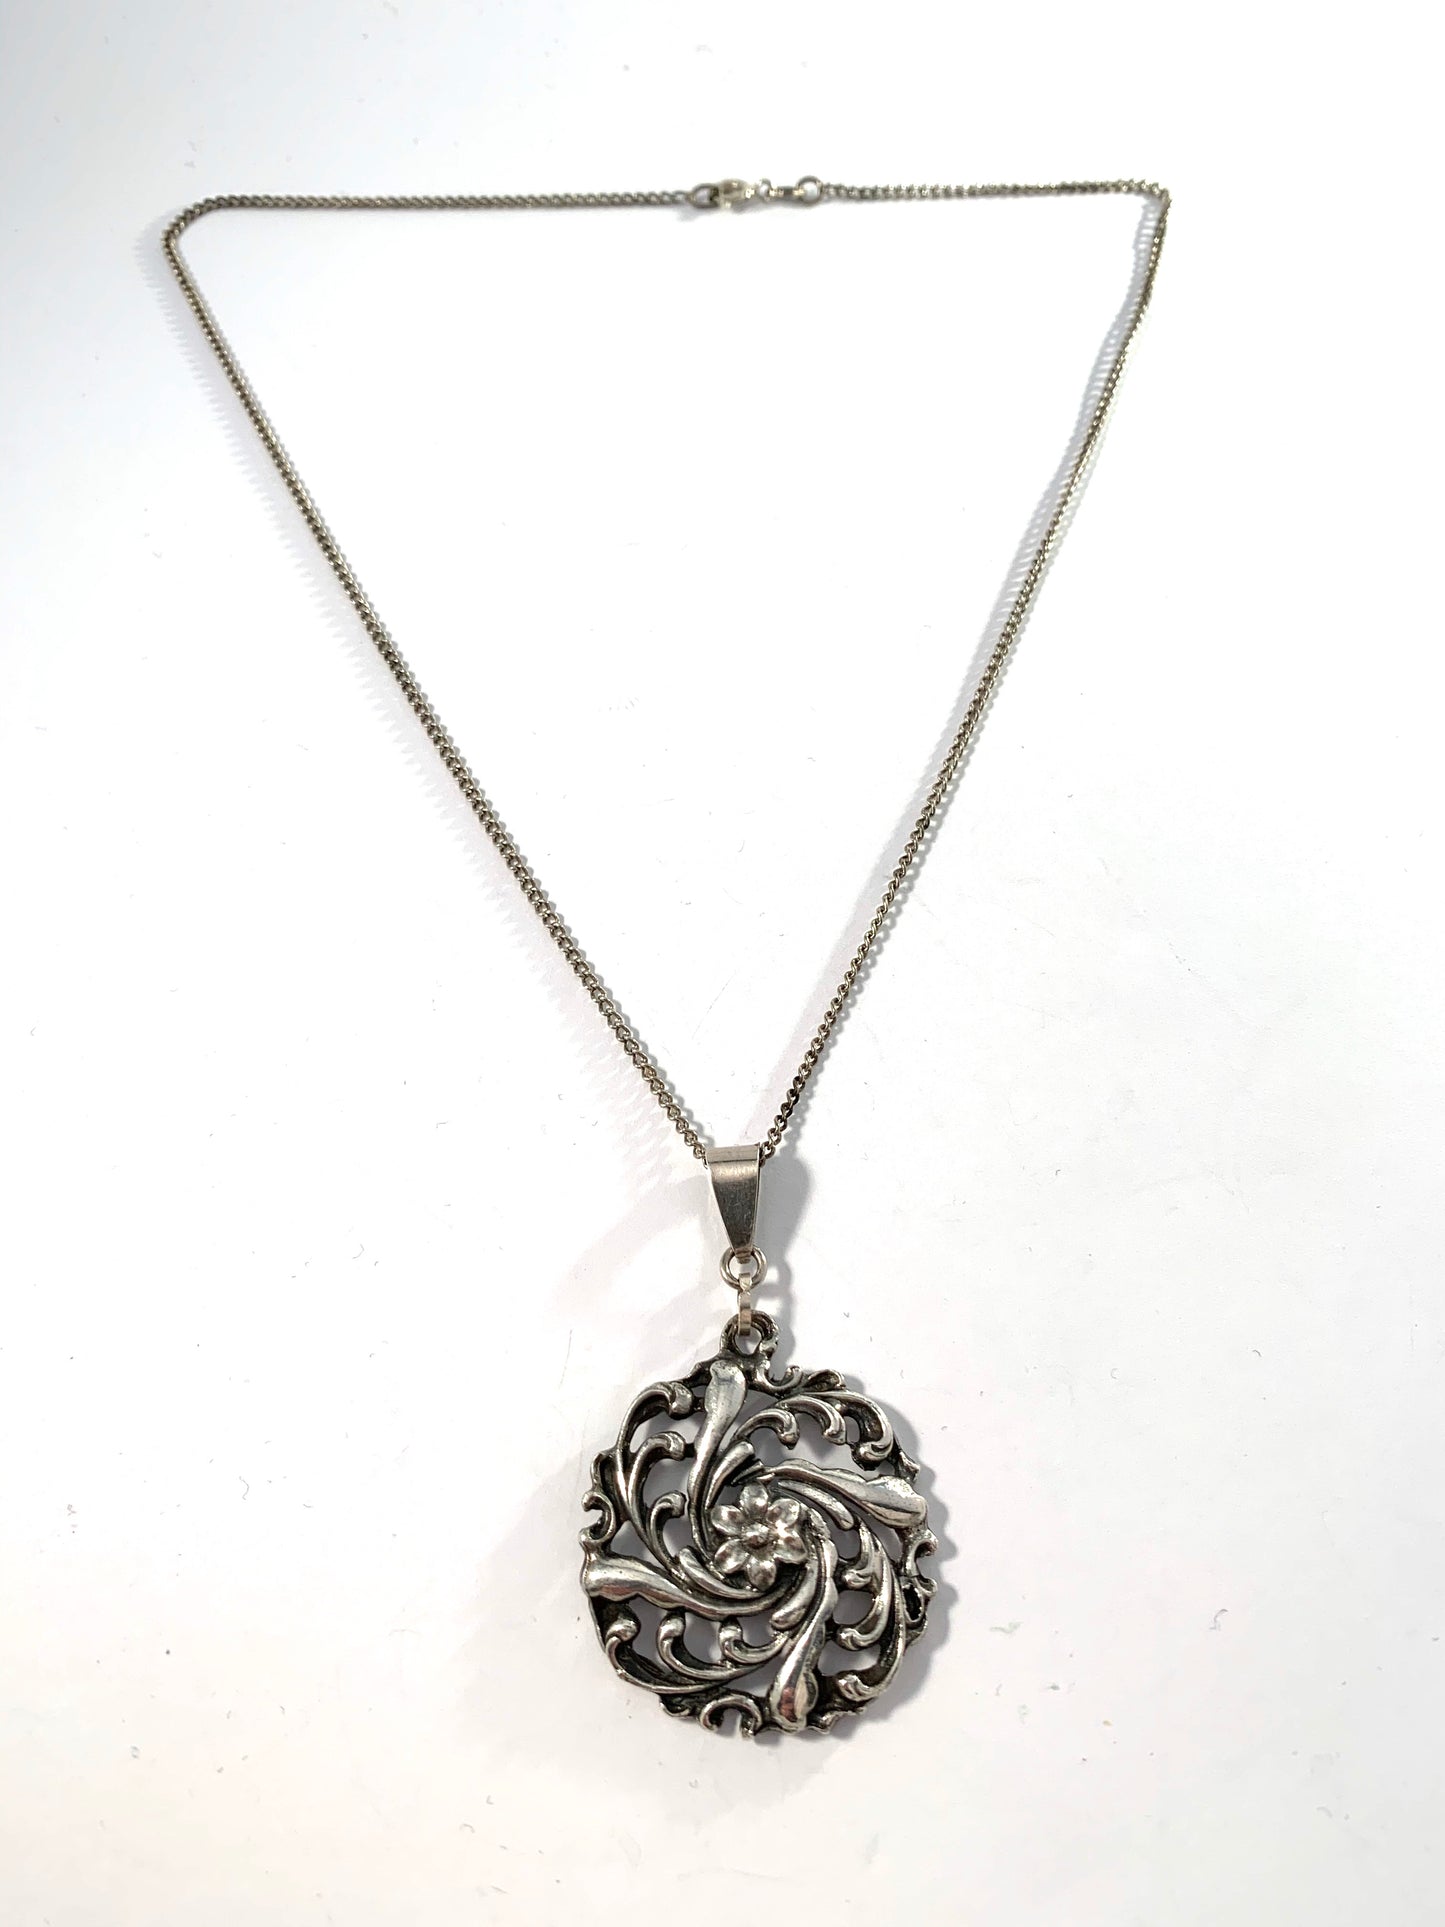 Johan Petersson, Sweden 1948. Mid Century Sterling Silver Pendant Necklace.